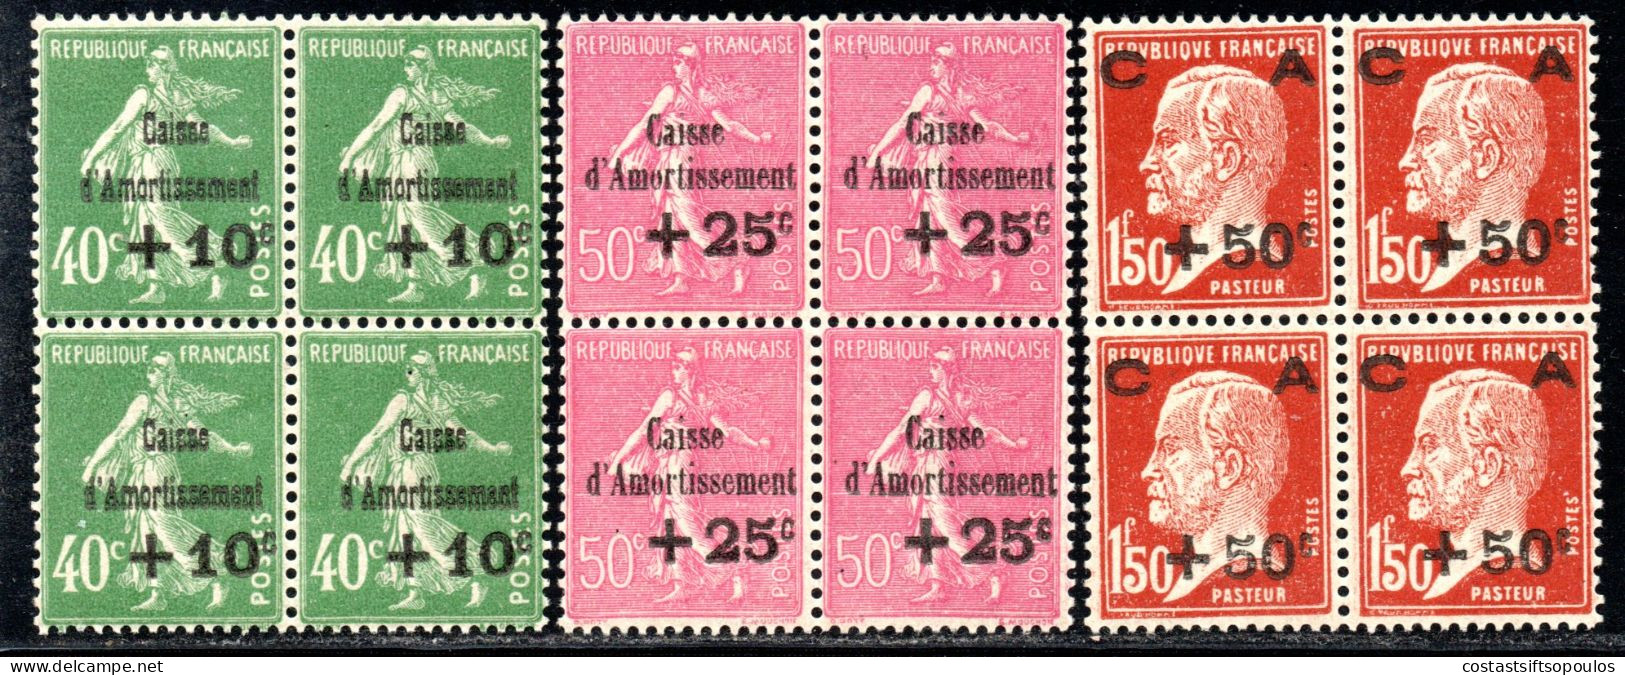 2614.FRANCE 1929 SINKING FUNDS #253-255 MNH BLOCKS OF 4,2-3 INVISIBLE TRACES OF HINGE.SEE VERY LIGHT GUM BLEMISHES - 1927-31 Sinking Fund